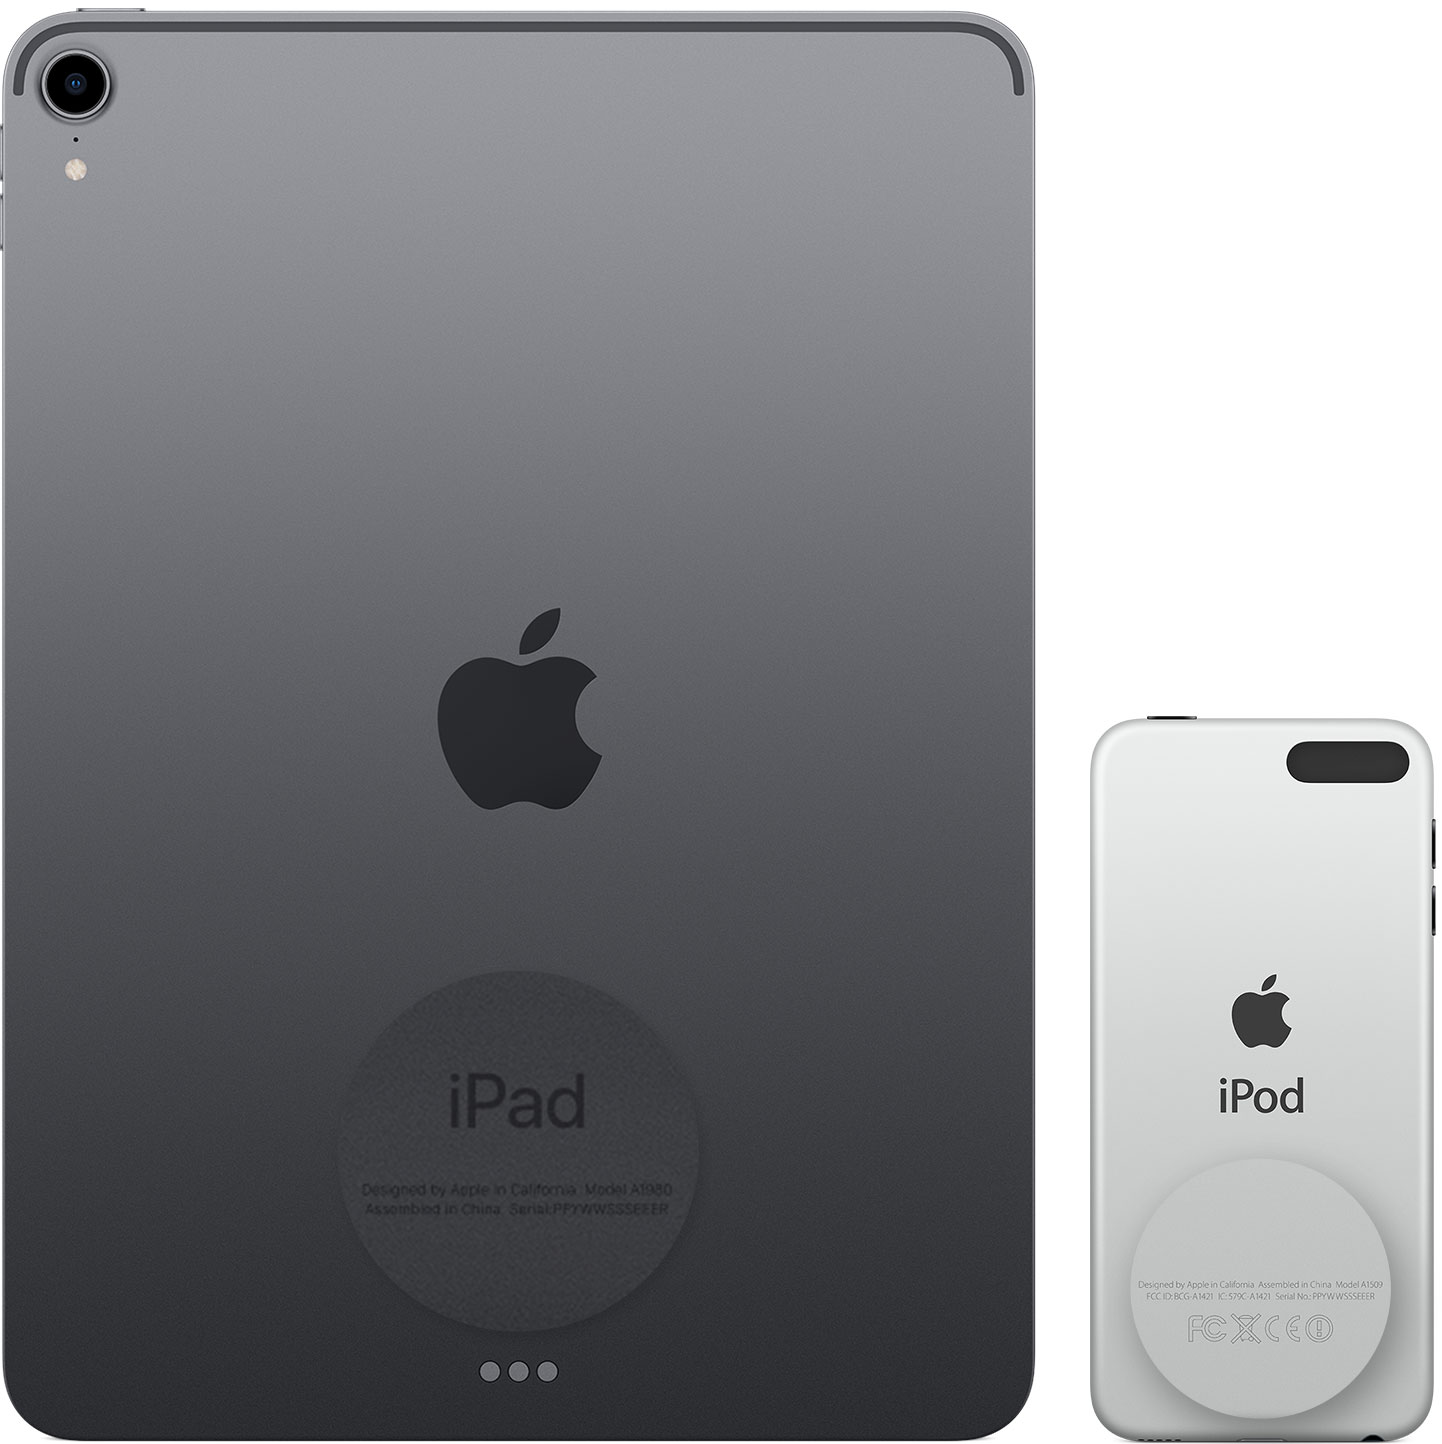 Image shows the back of an iPad and iPod touch